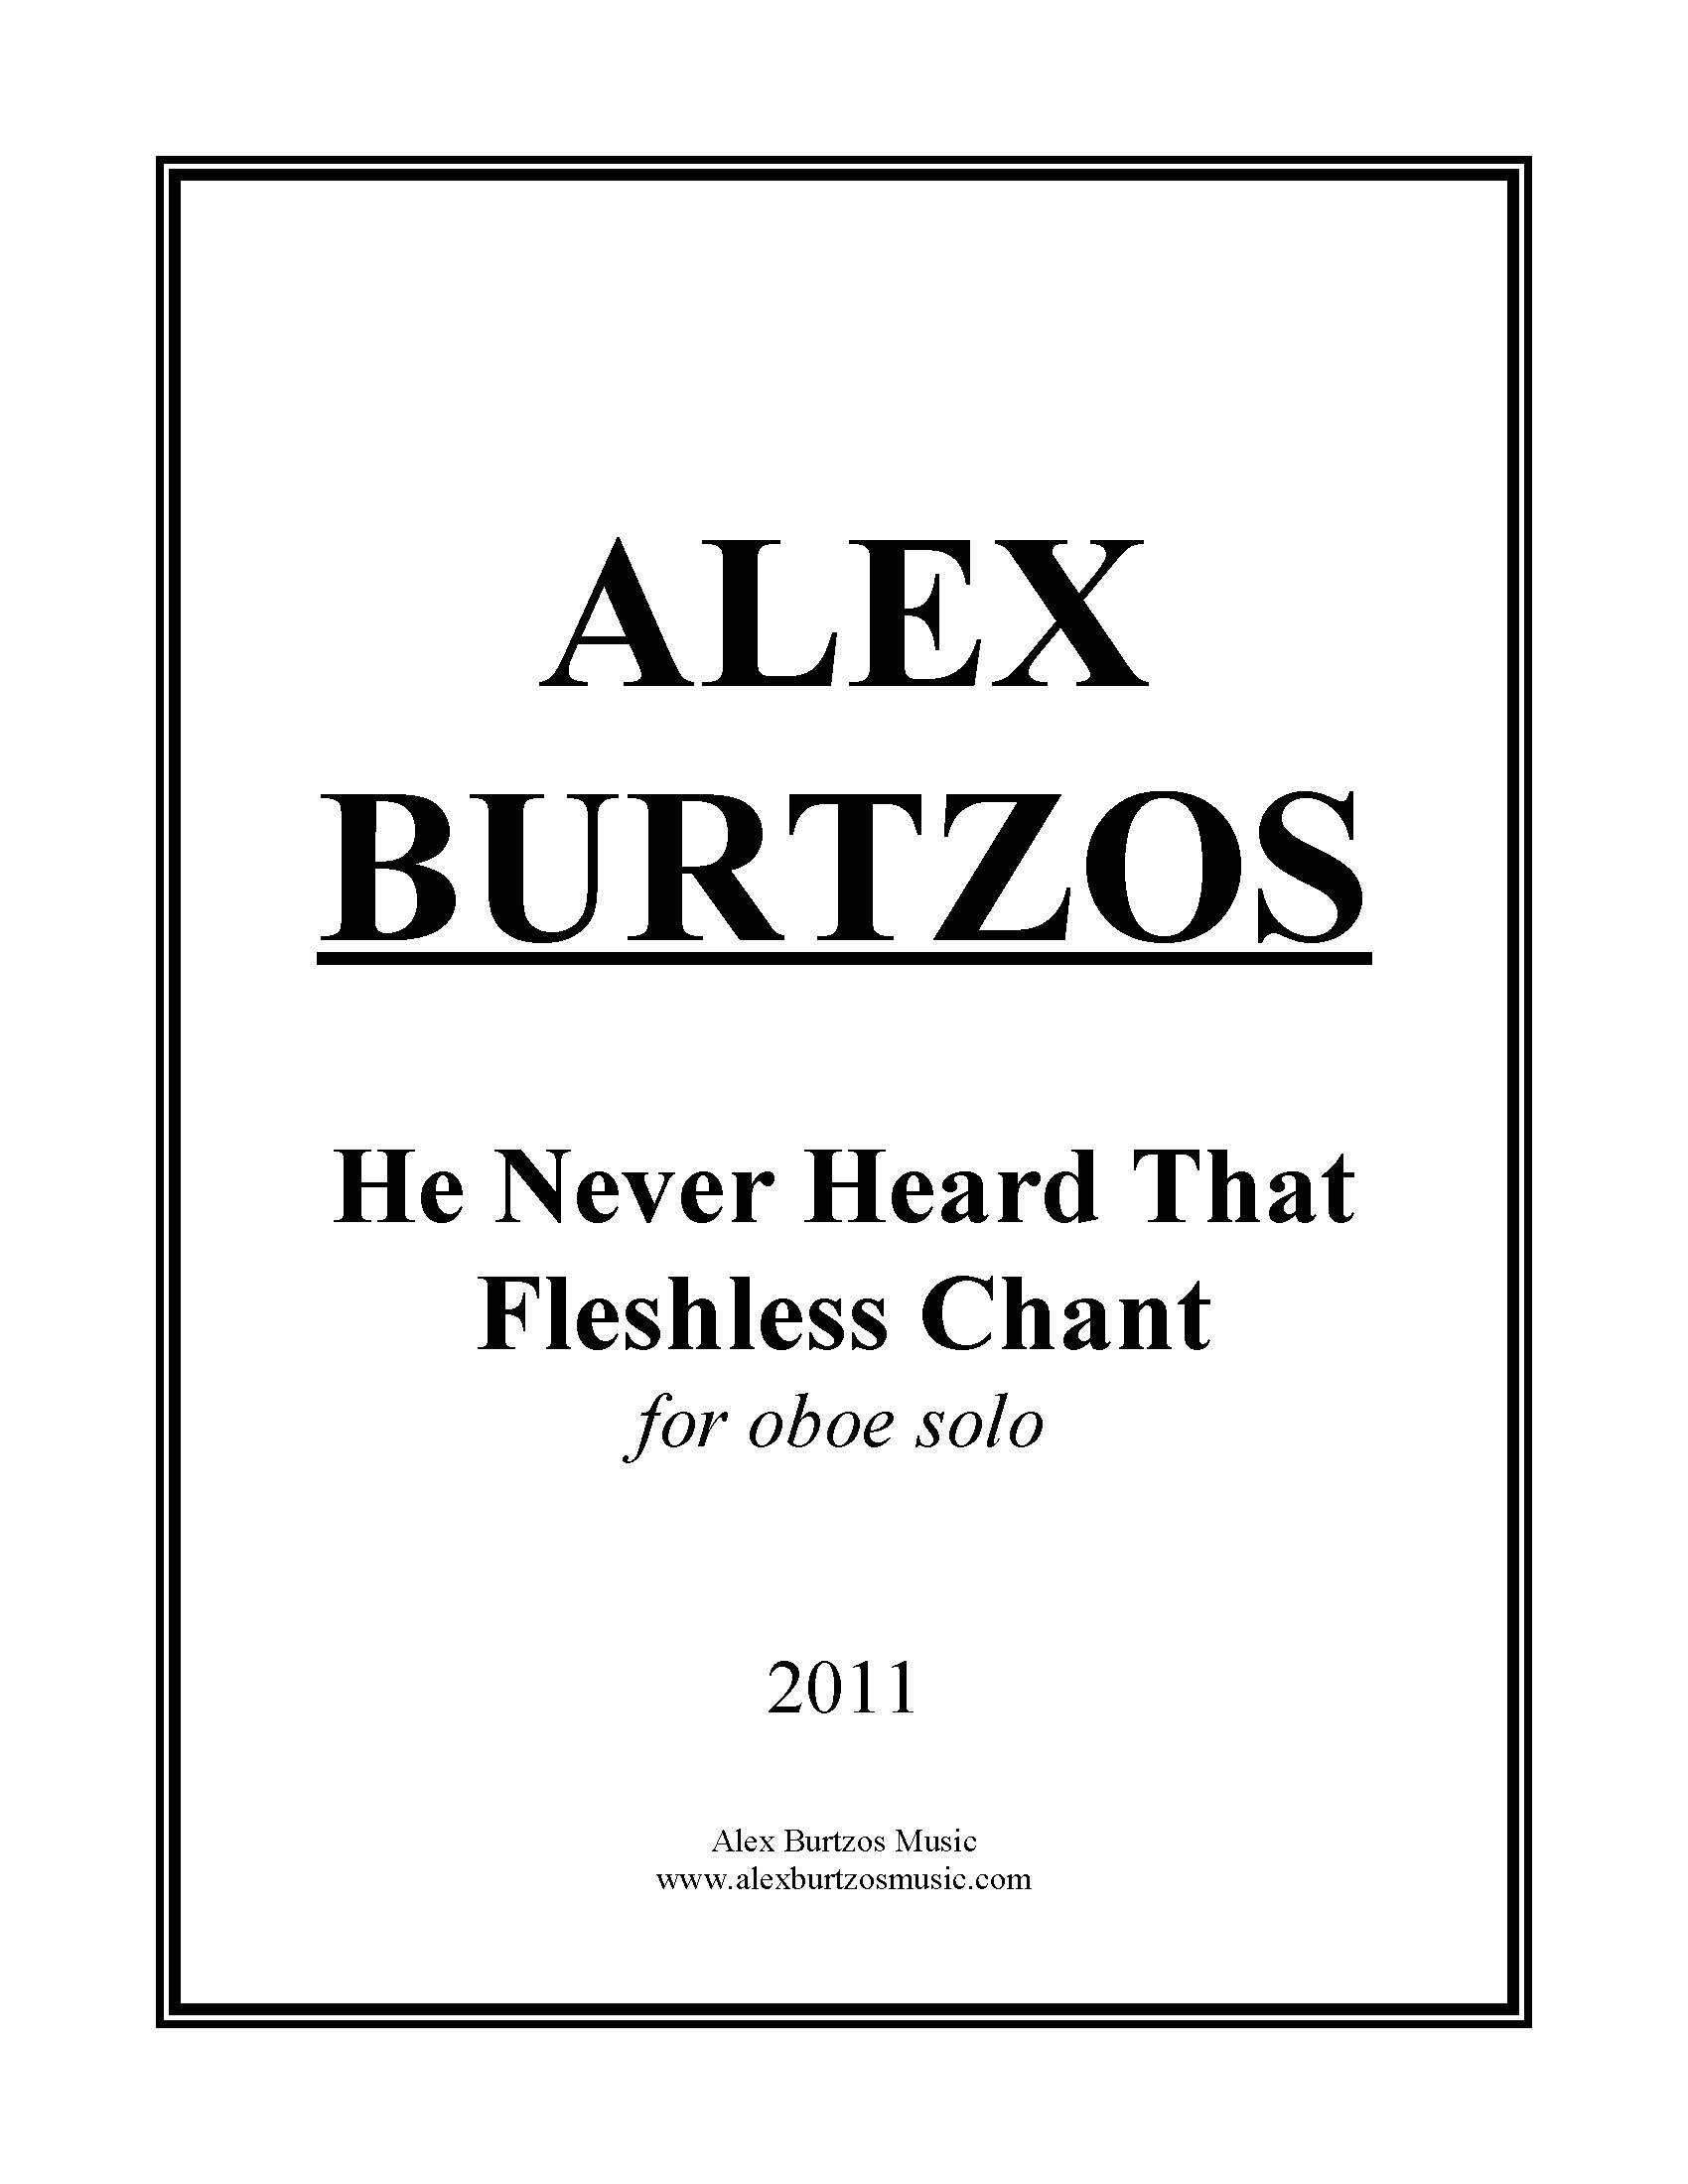 He Never Heard That Fleshless Chant - Complete Score_Page_01.jpg